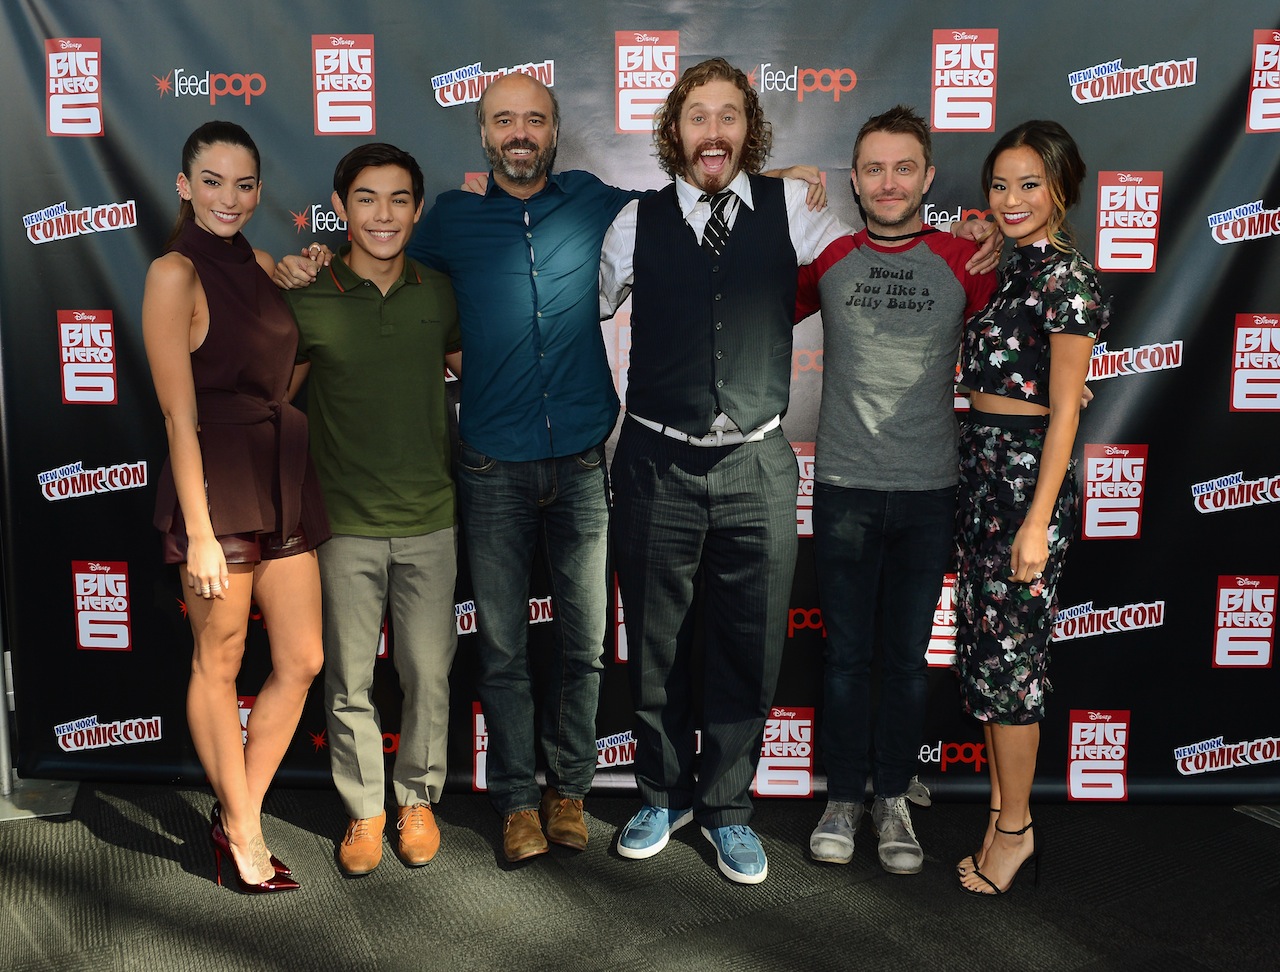 NEW YORK, NY - OCTOBER 09:  (L-R) Actors Genesis Rodriguez, Ryan Potter, Scott Adsit, and T.J. Miller, panel host Chris Hardwick, and actress Jamie Chung attend Walt Disney Studios' 2014 New York Comic Con presentations of "Big Hero 6" and "Tomorrowland" at the Javits Convention Center on Thursday October 9, 2014 in New York City.  (Photo by Stephen Lovekin/Getty Images for Disney) *** Local Caption *** Genesis Rodriguez;Ryan Potter;Scott Adsit;T.J. Miller;Chris Hardwick;Jamie Chung